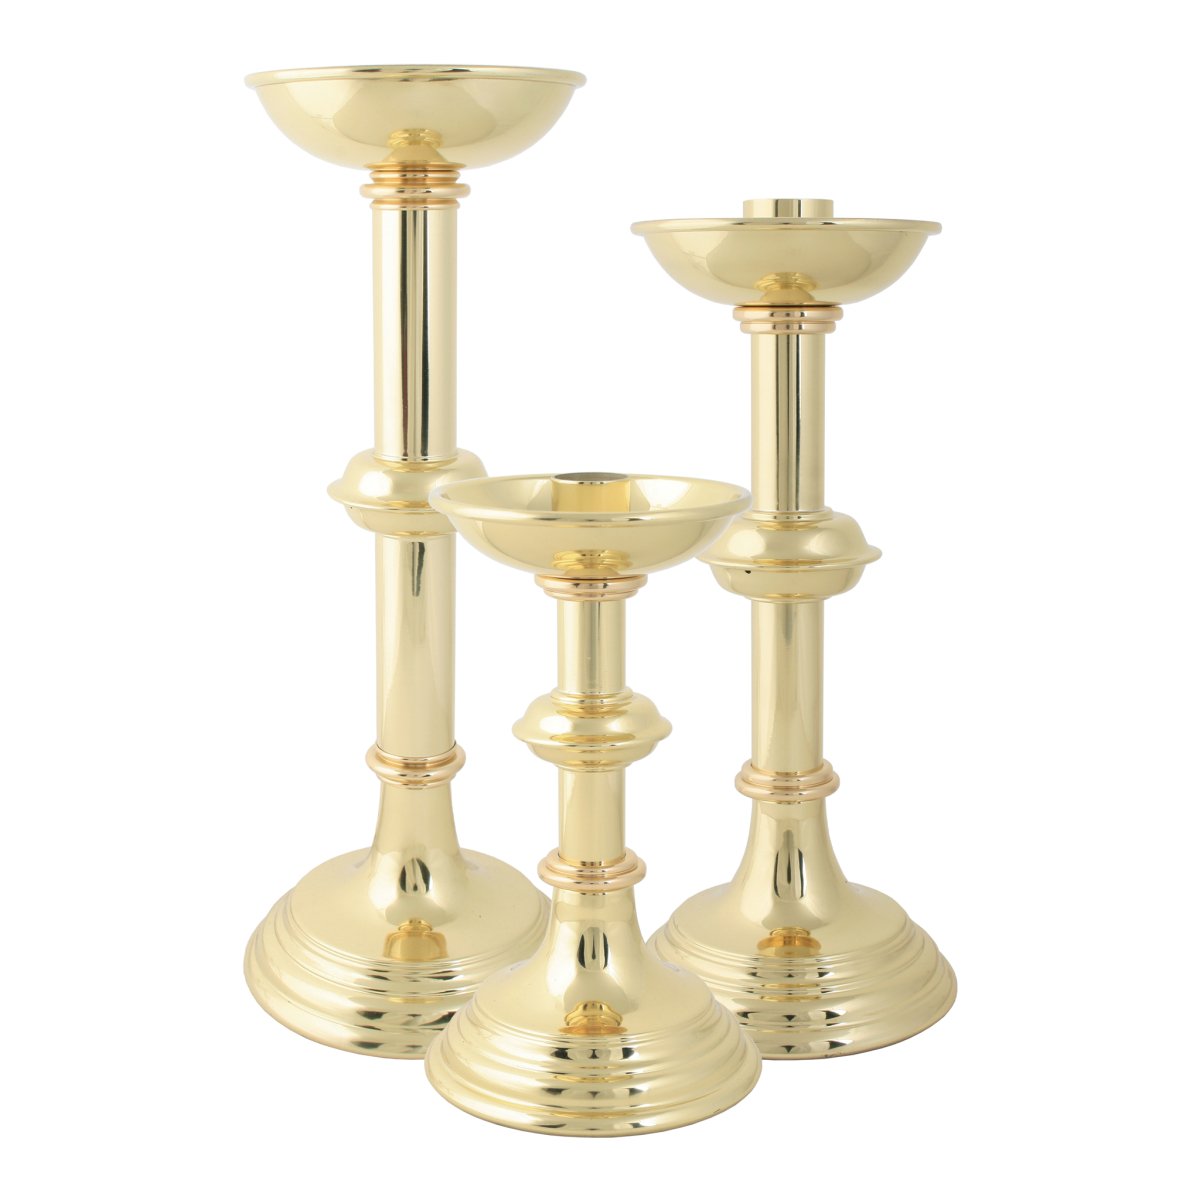 Dome Top Candlestick - Hayes & Finch